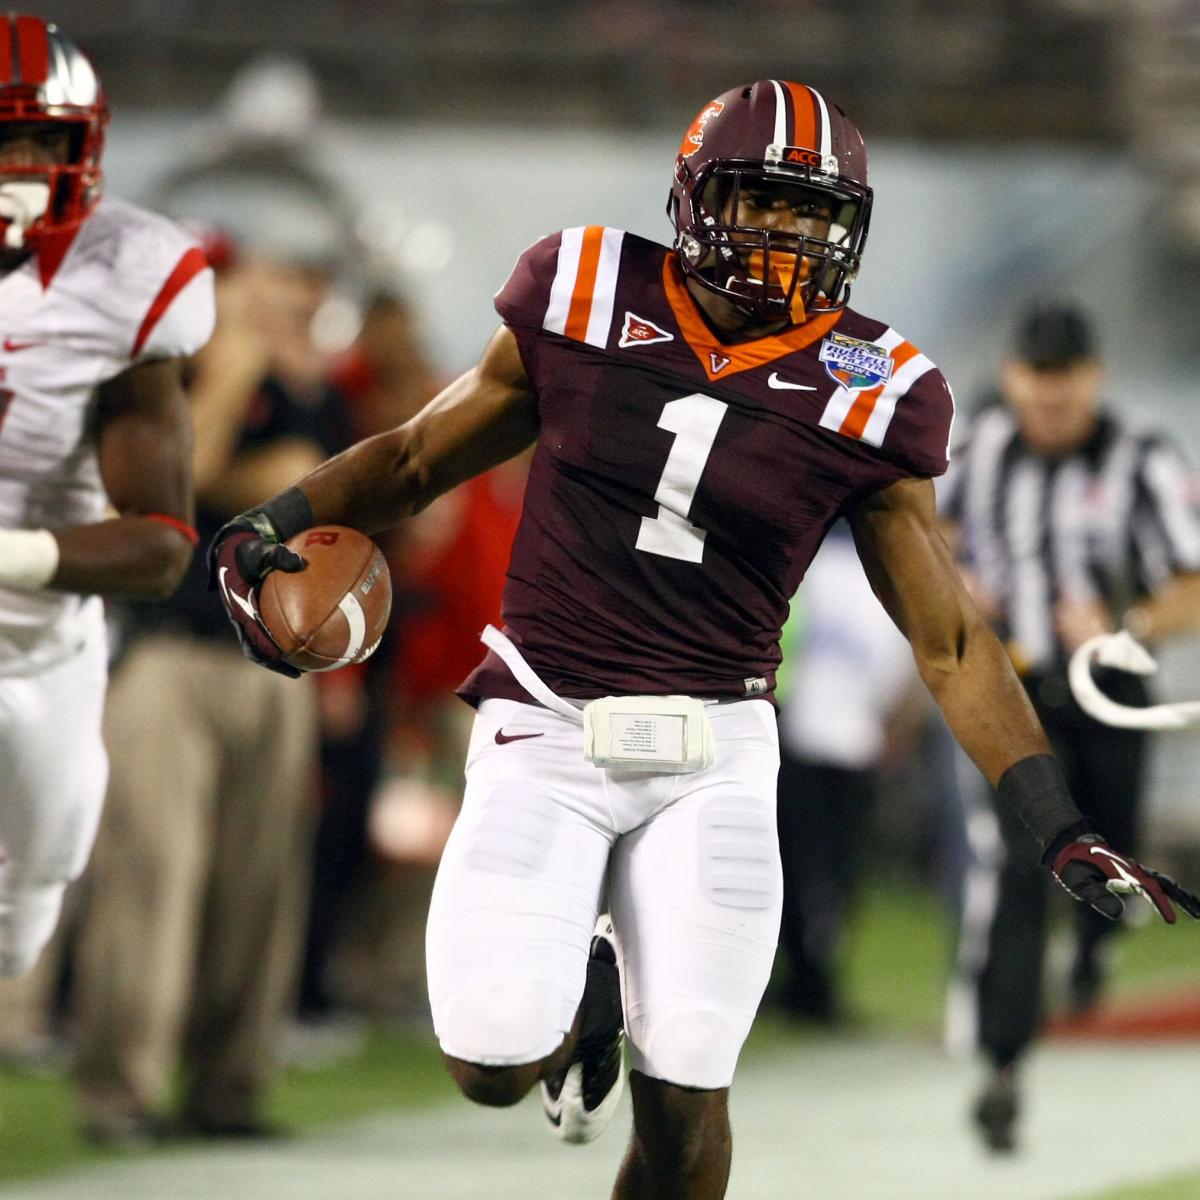 Virginia Tech Football: 5 Players We Are Most Excited to Watch in 2013